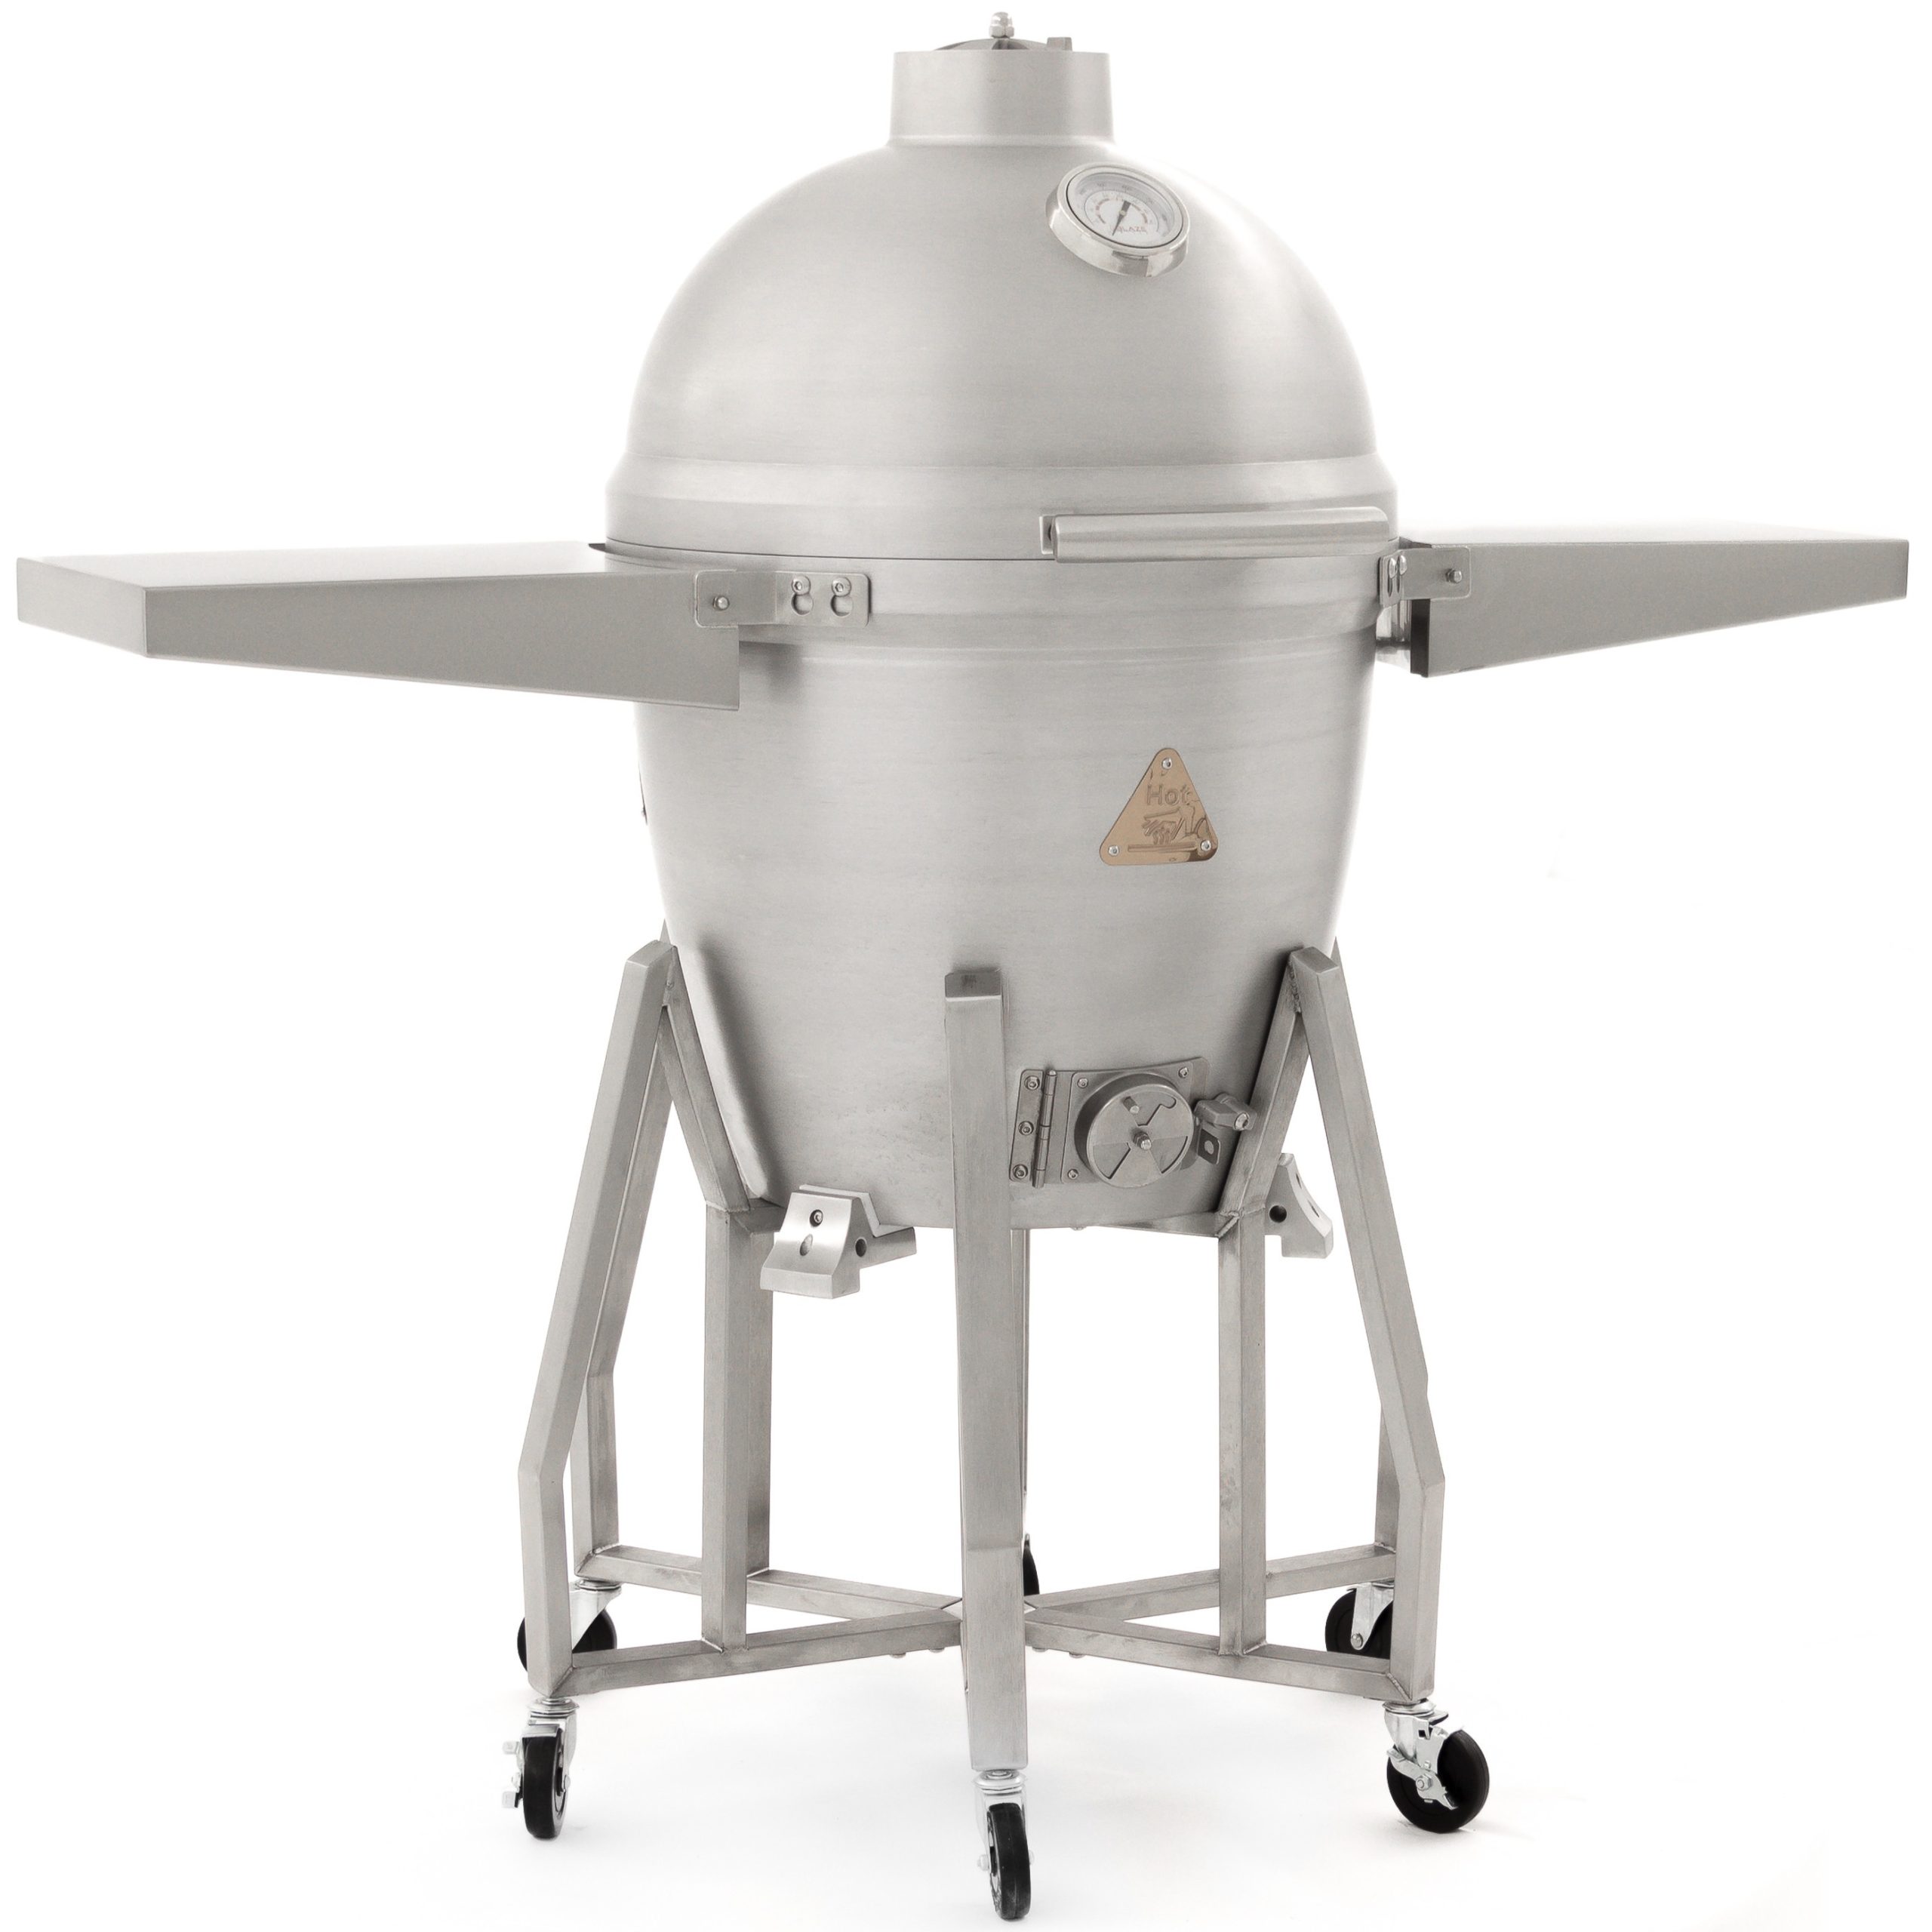 blaze 20-inch cast aluminum kamado grill with stainless steel cart and round shelf on leo edit